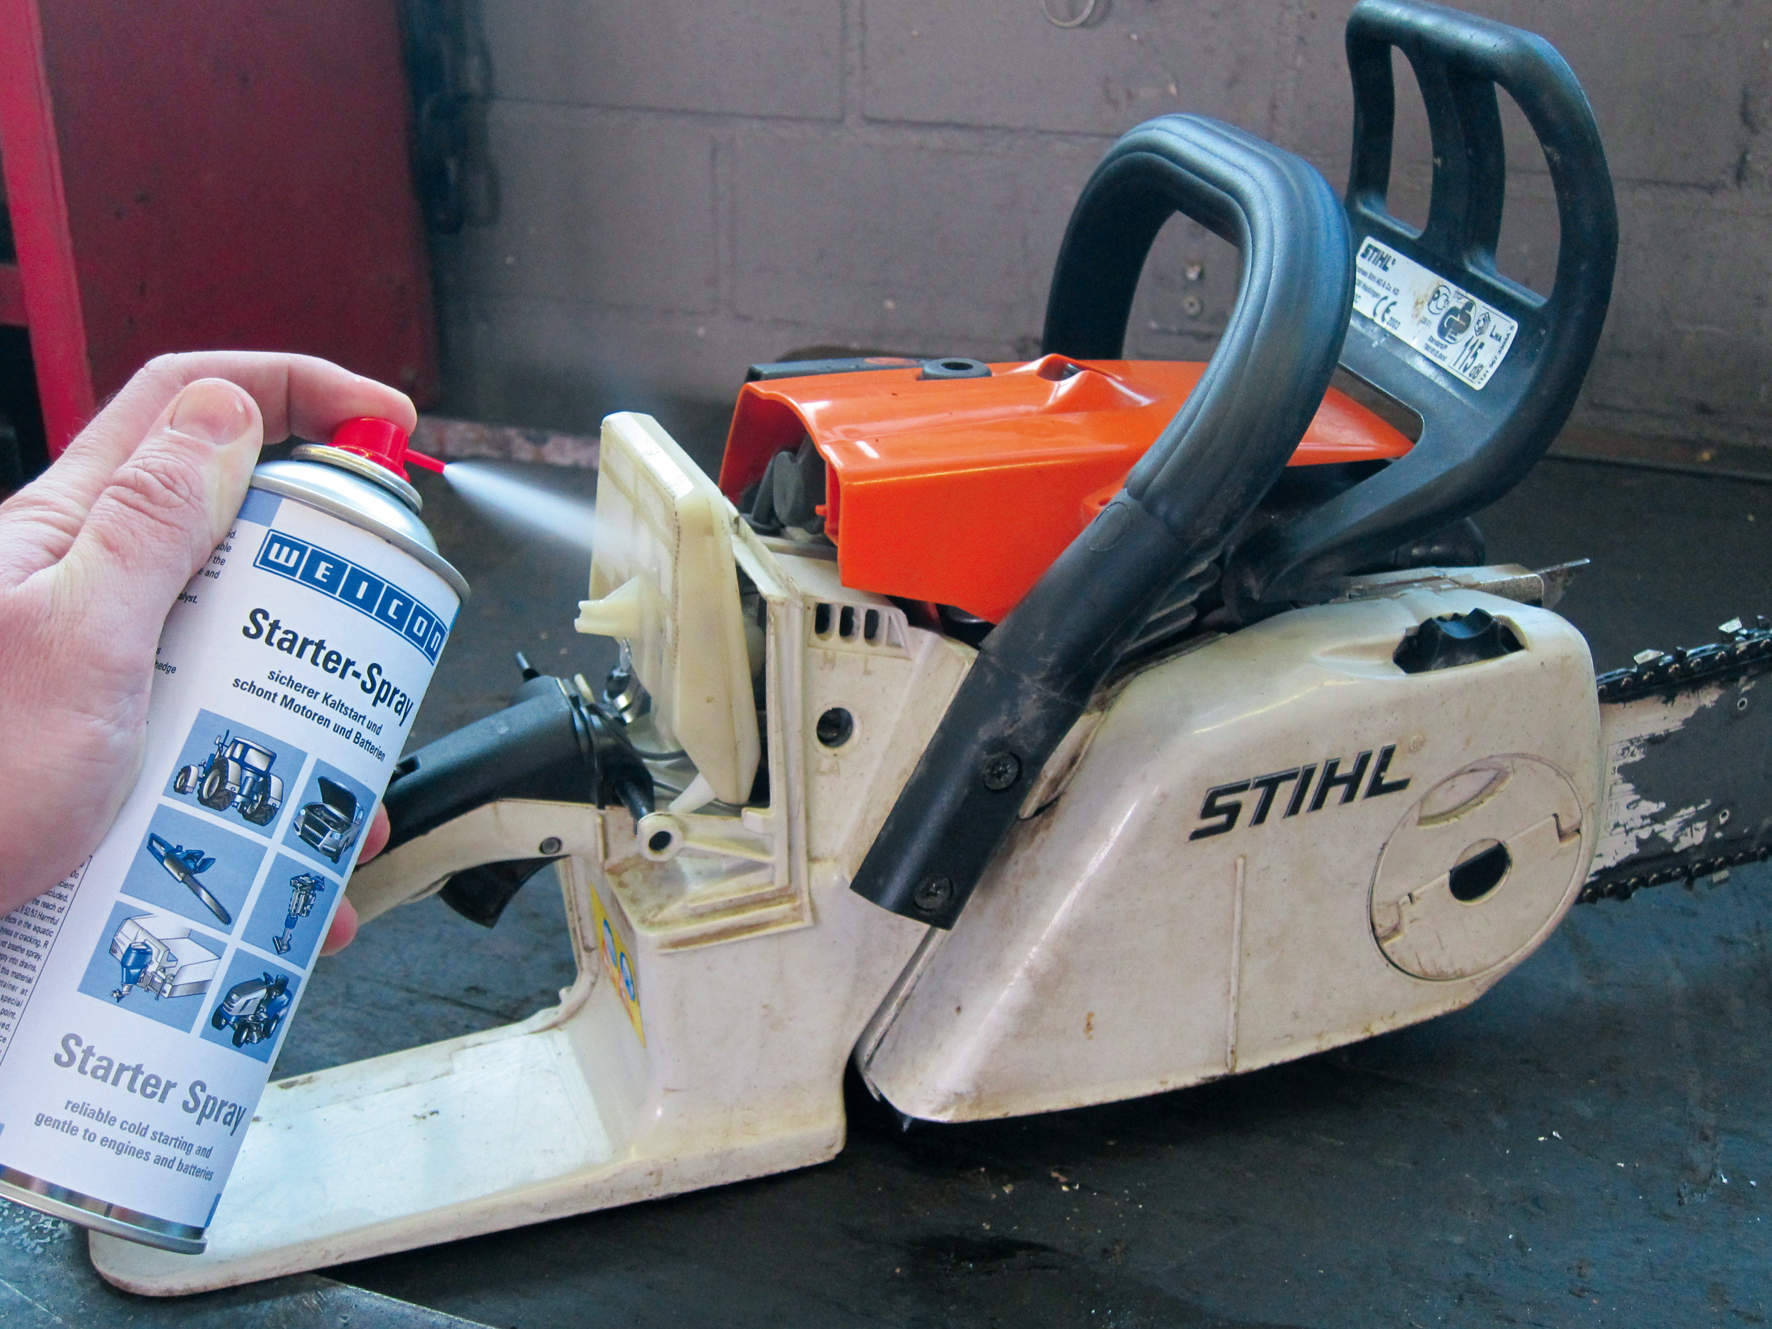 Getting a stihl chainsaw engine started with Starter Spray from Swift Supplies Australia